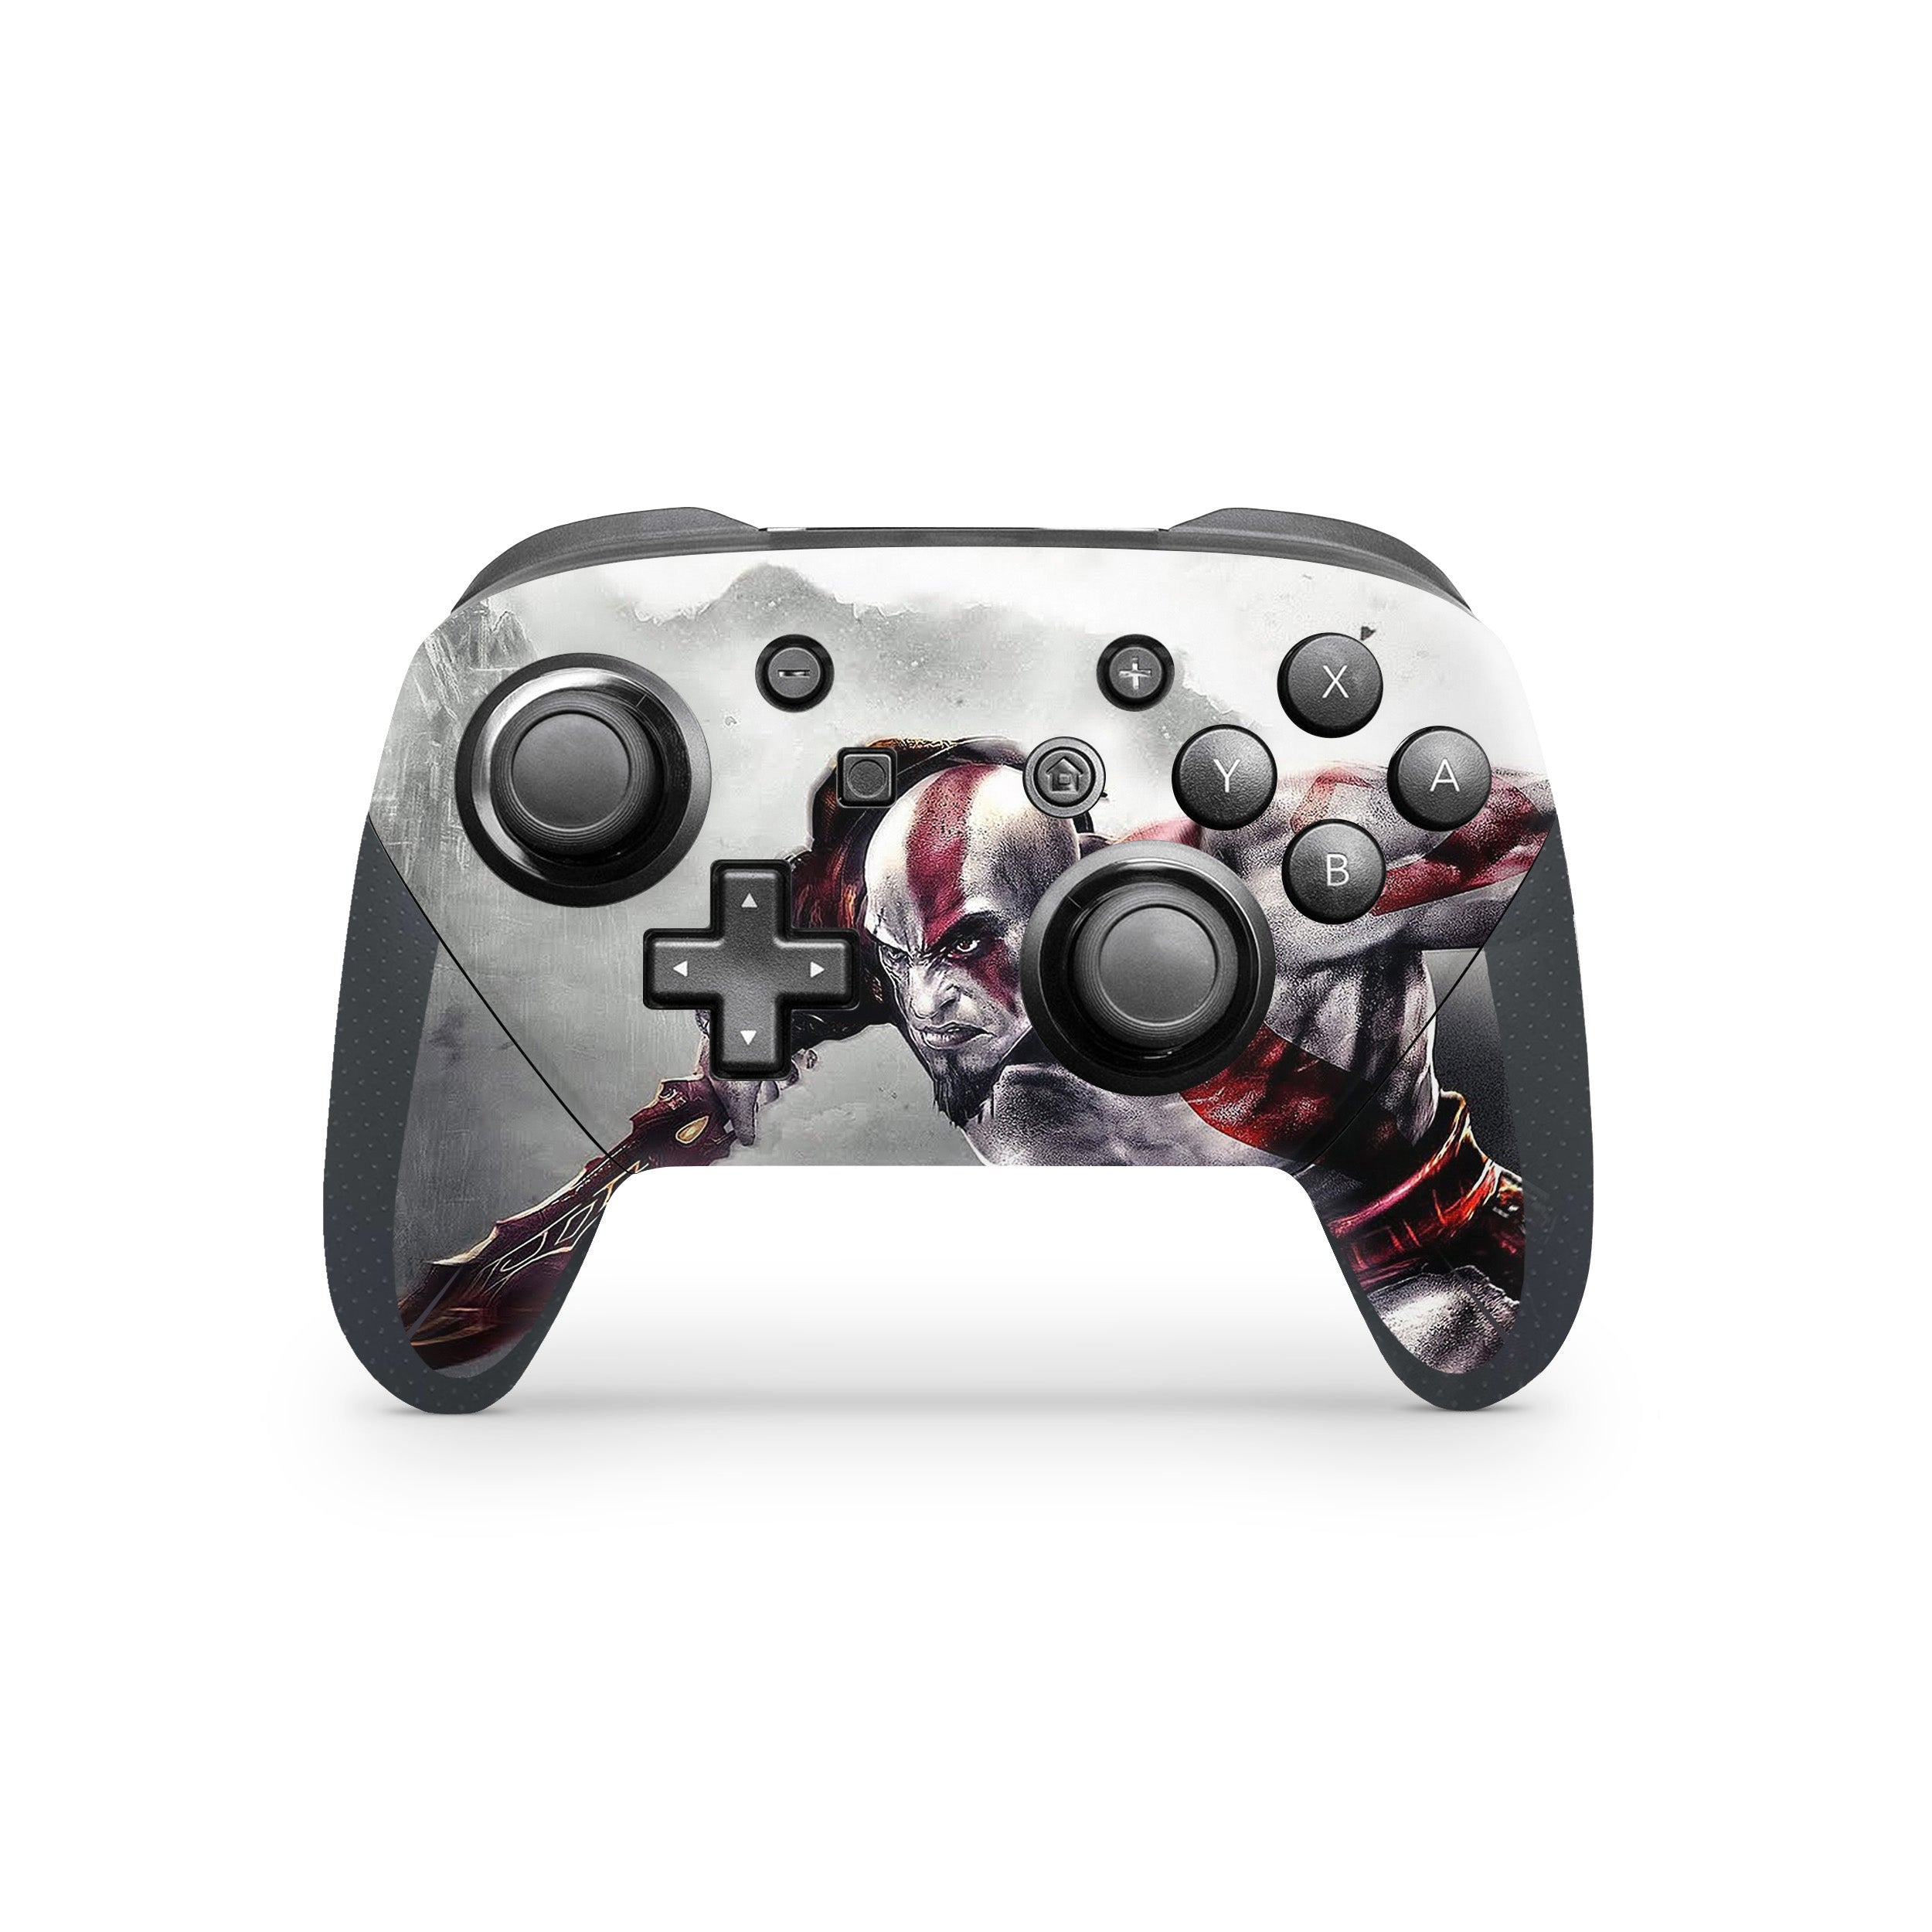 A video game skin featuring a God Of War Kratos Face design for the Switch Pro Controller.